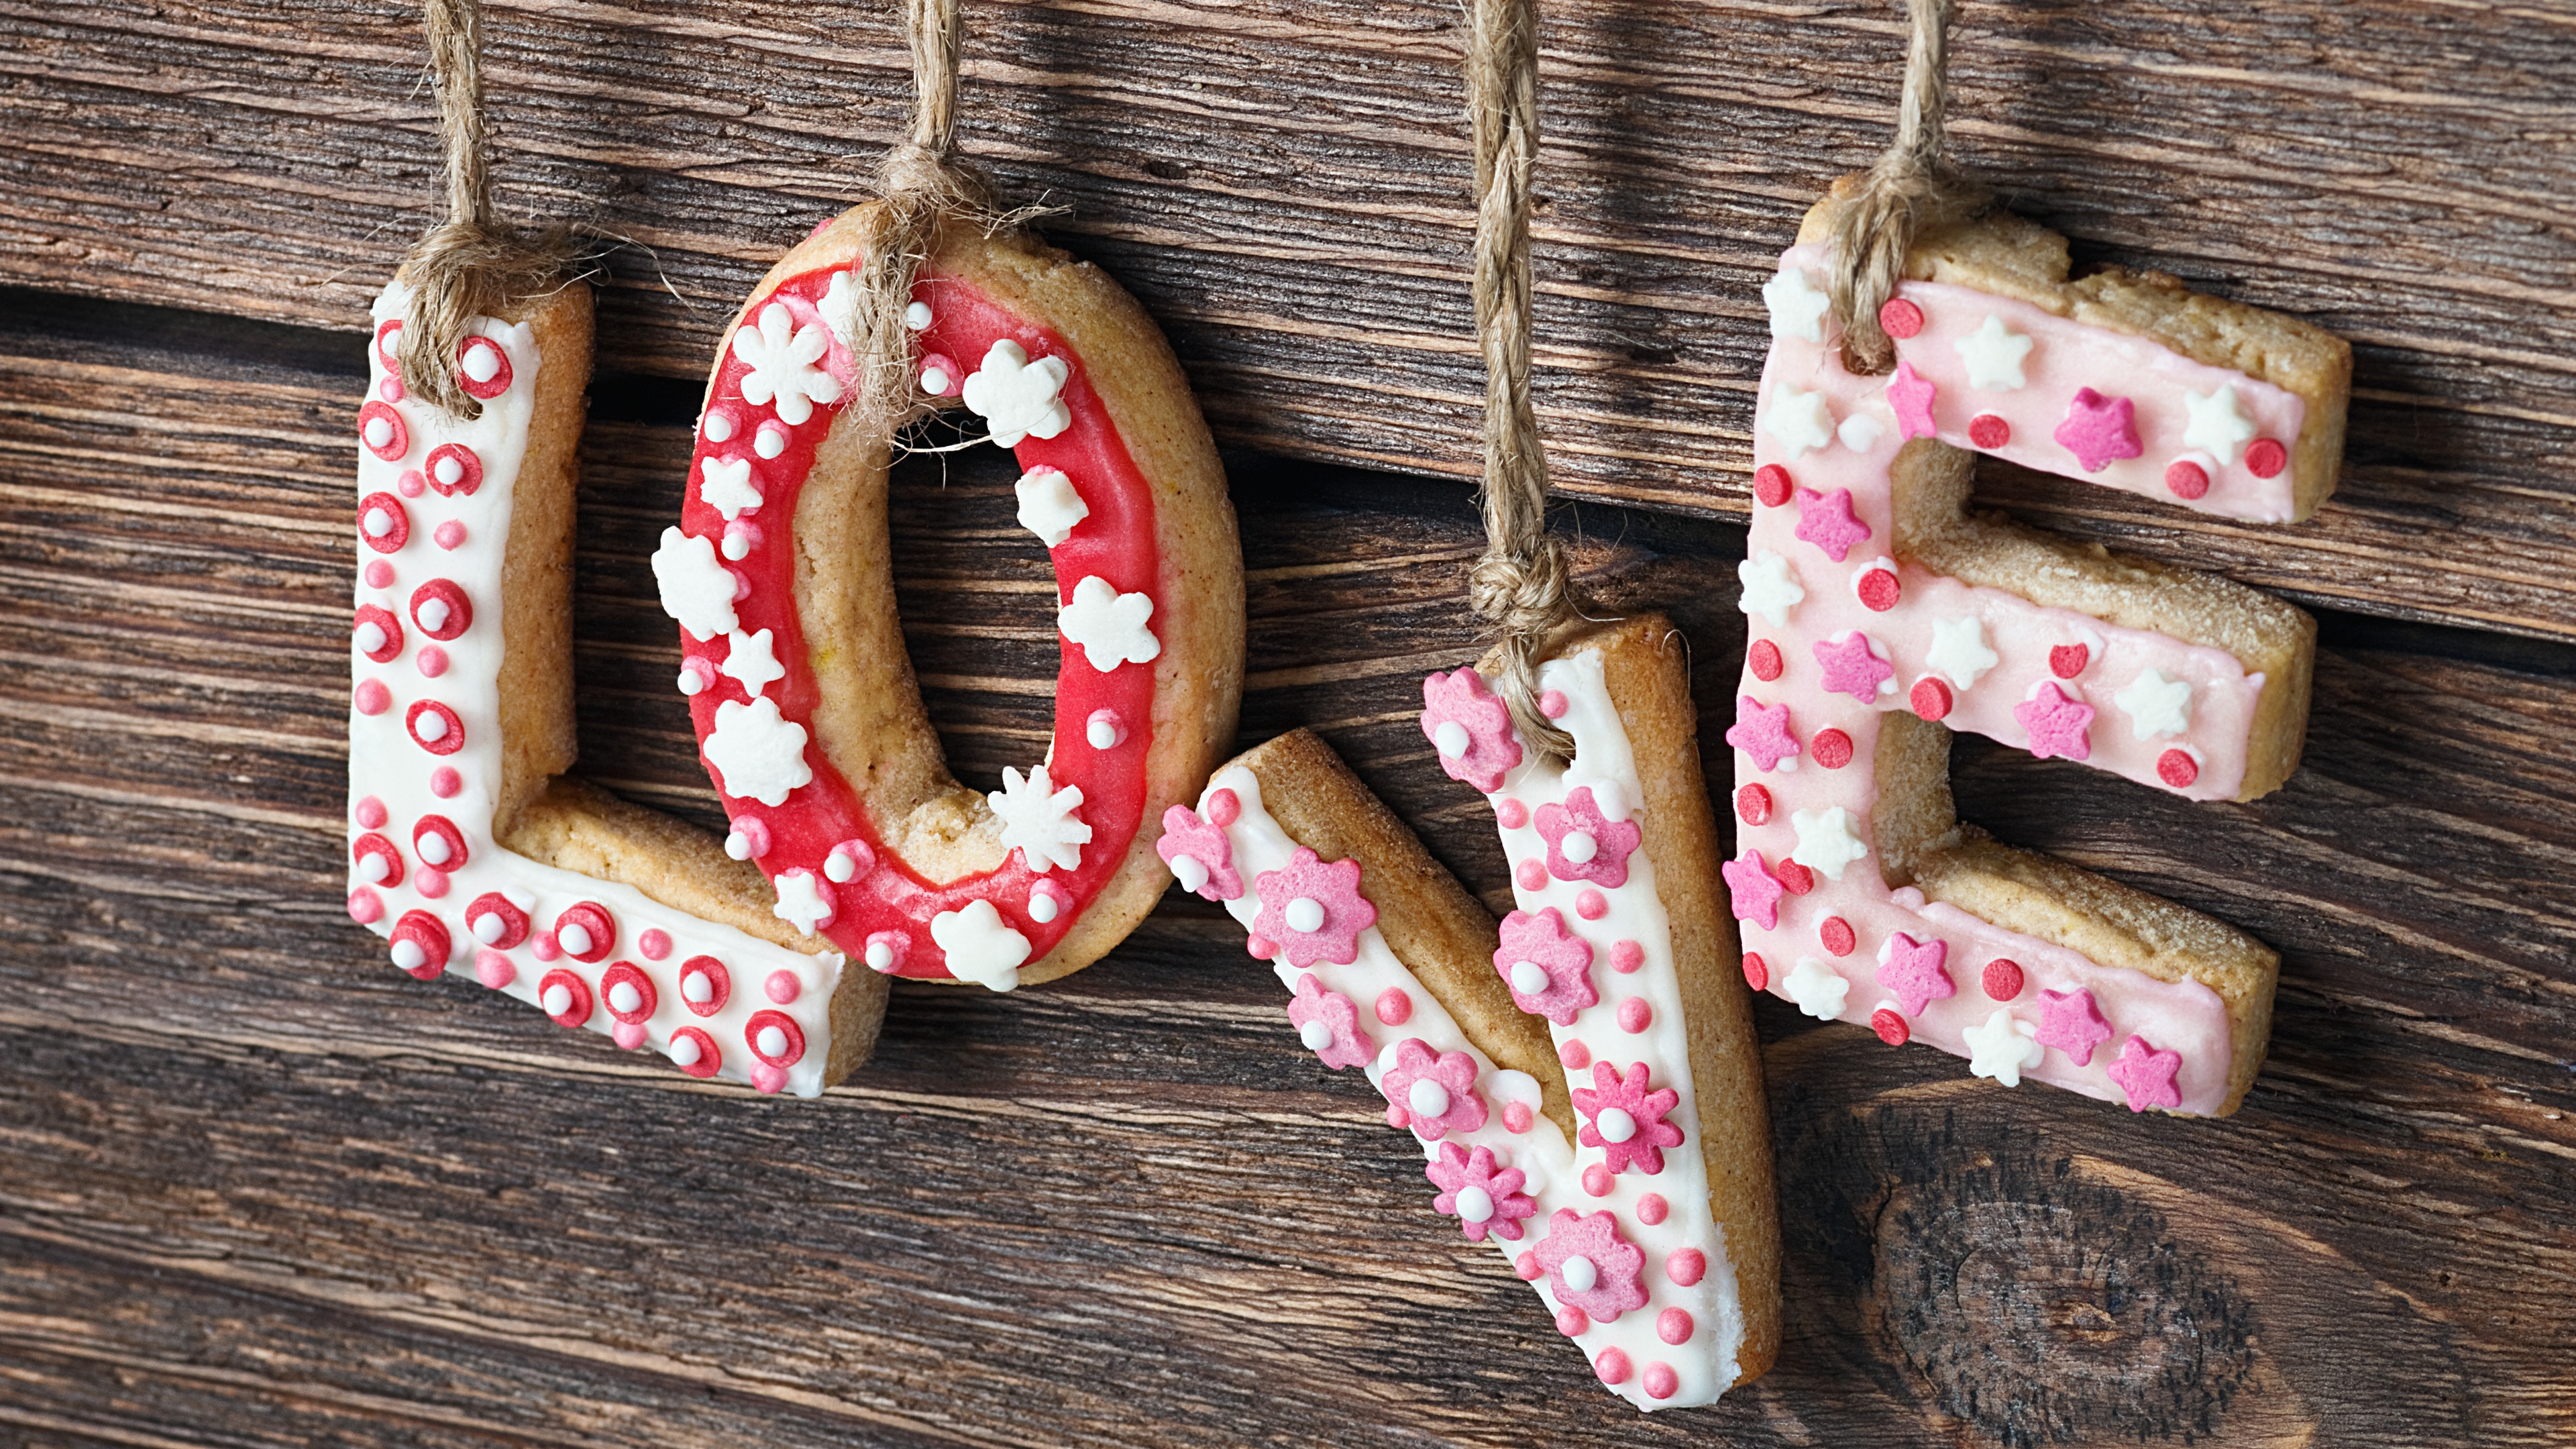 Love Gingerbread Letters for 3840 x 2160 Ultra HD resolution